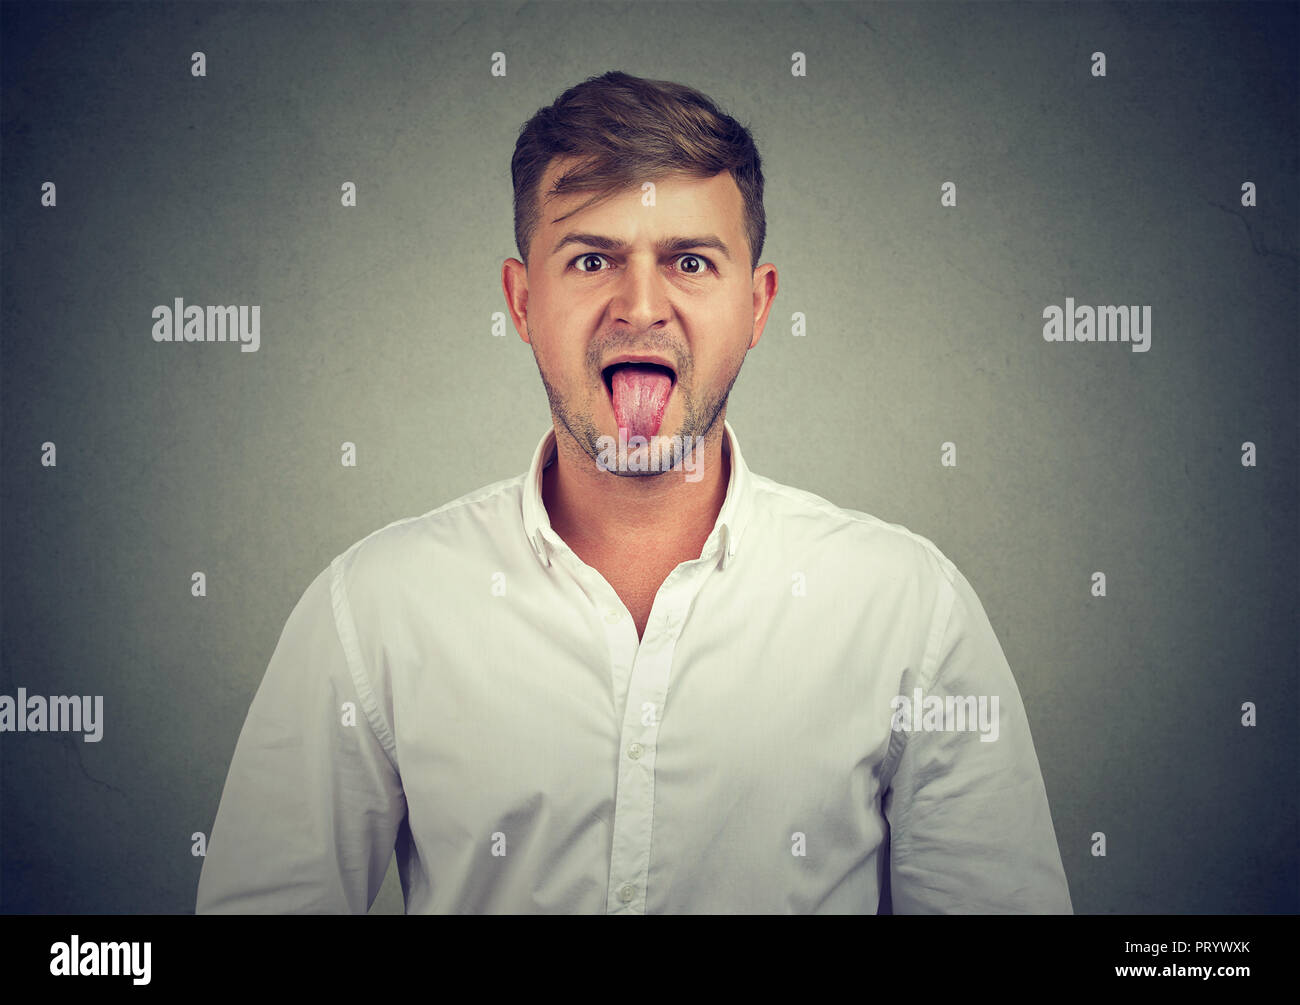 Closeup portrait of a man sticking his tongue out at you isolated on gray background. Stock Photo